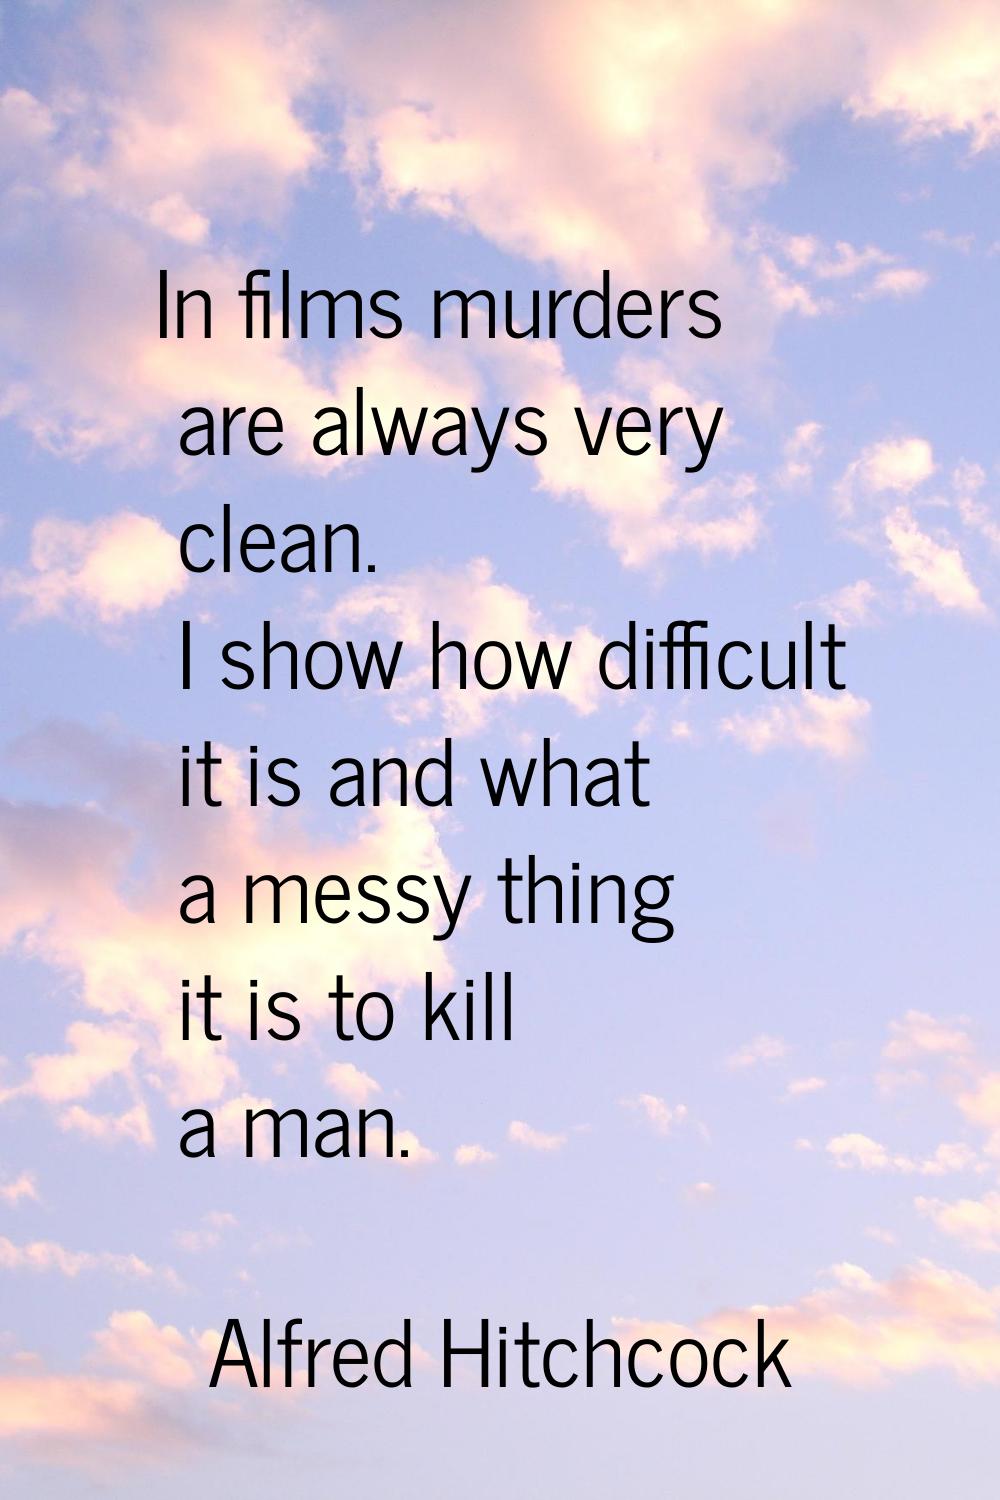 In films murders are always very clean. I show how difficult it is and what a messy thing it is to 